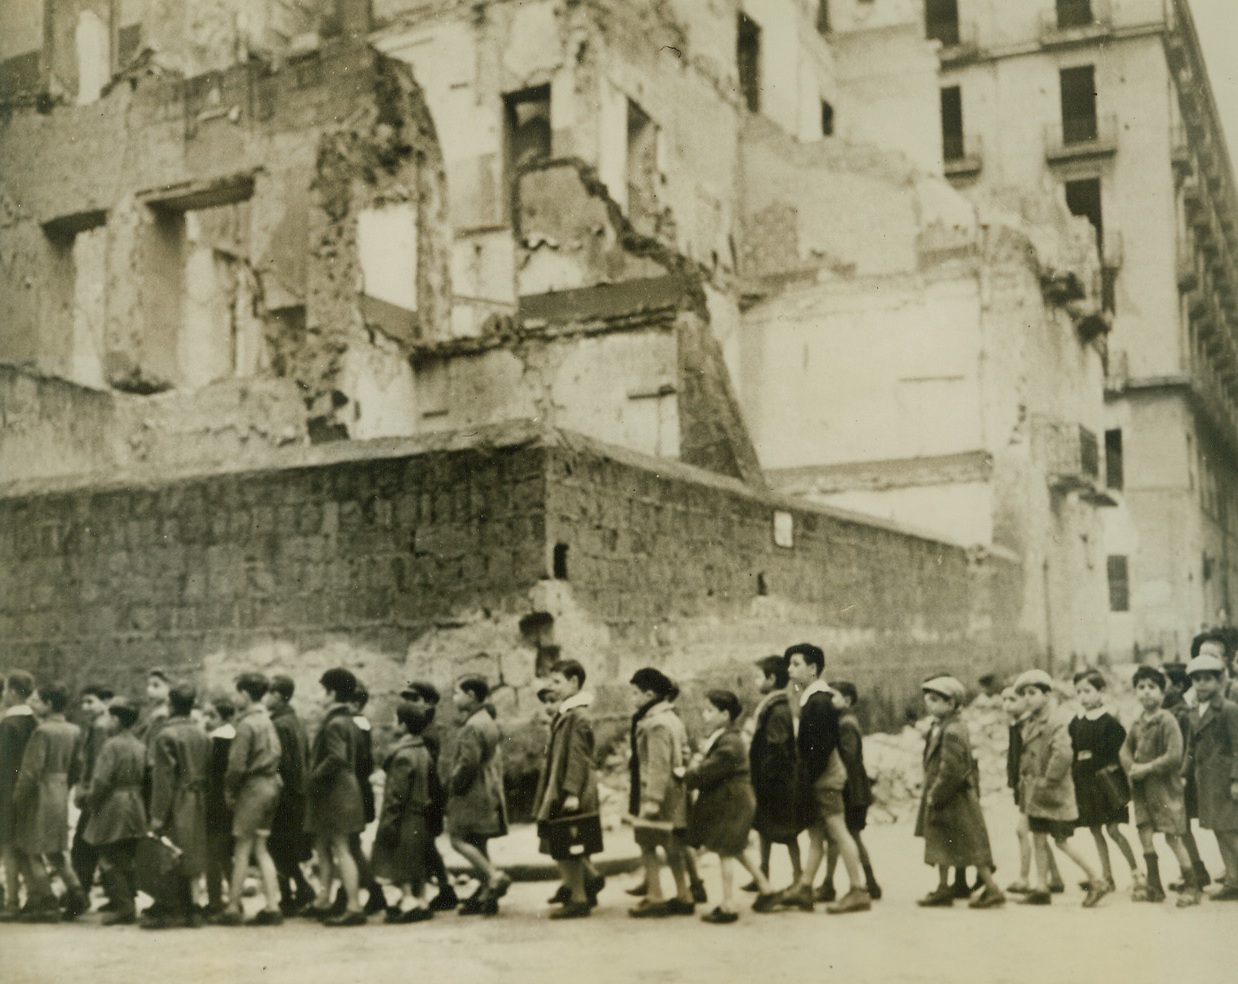 Vacation Over for Naples Kids, 2/14/1944. NAPLES, ITALY – Naples children, who have had a long holiday from the classroom as they hid from both Allied and Nazi bombs, now file back to school, passing war ruins on the way. Many Neapolitan families moved into hillside caves as war rocked their city. Credit Line (Acme);